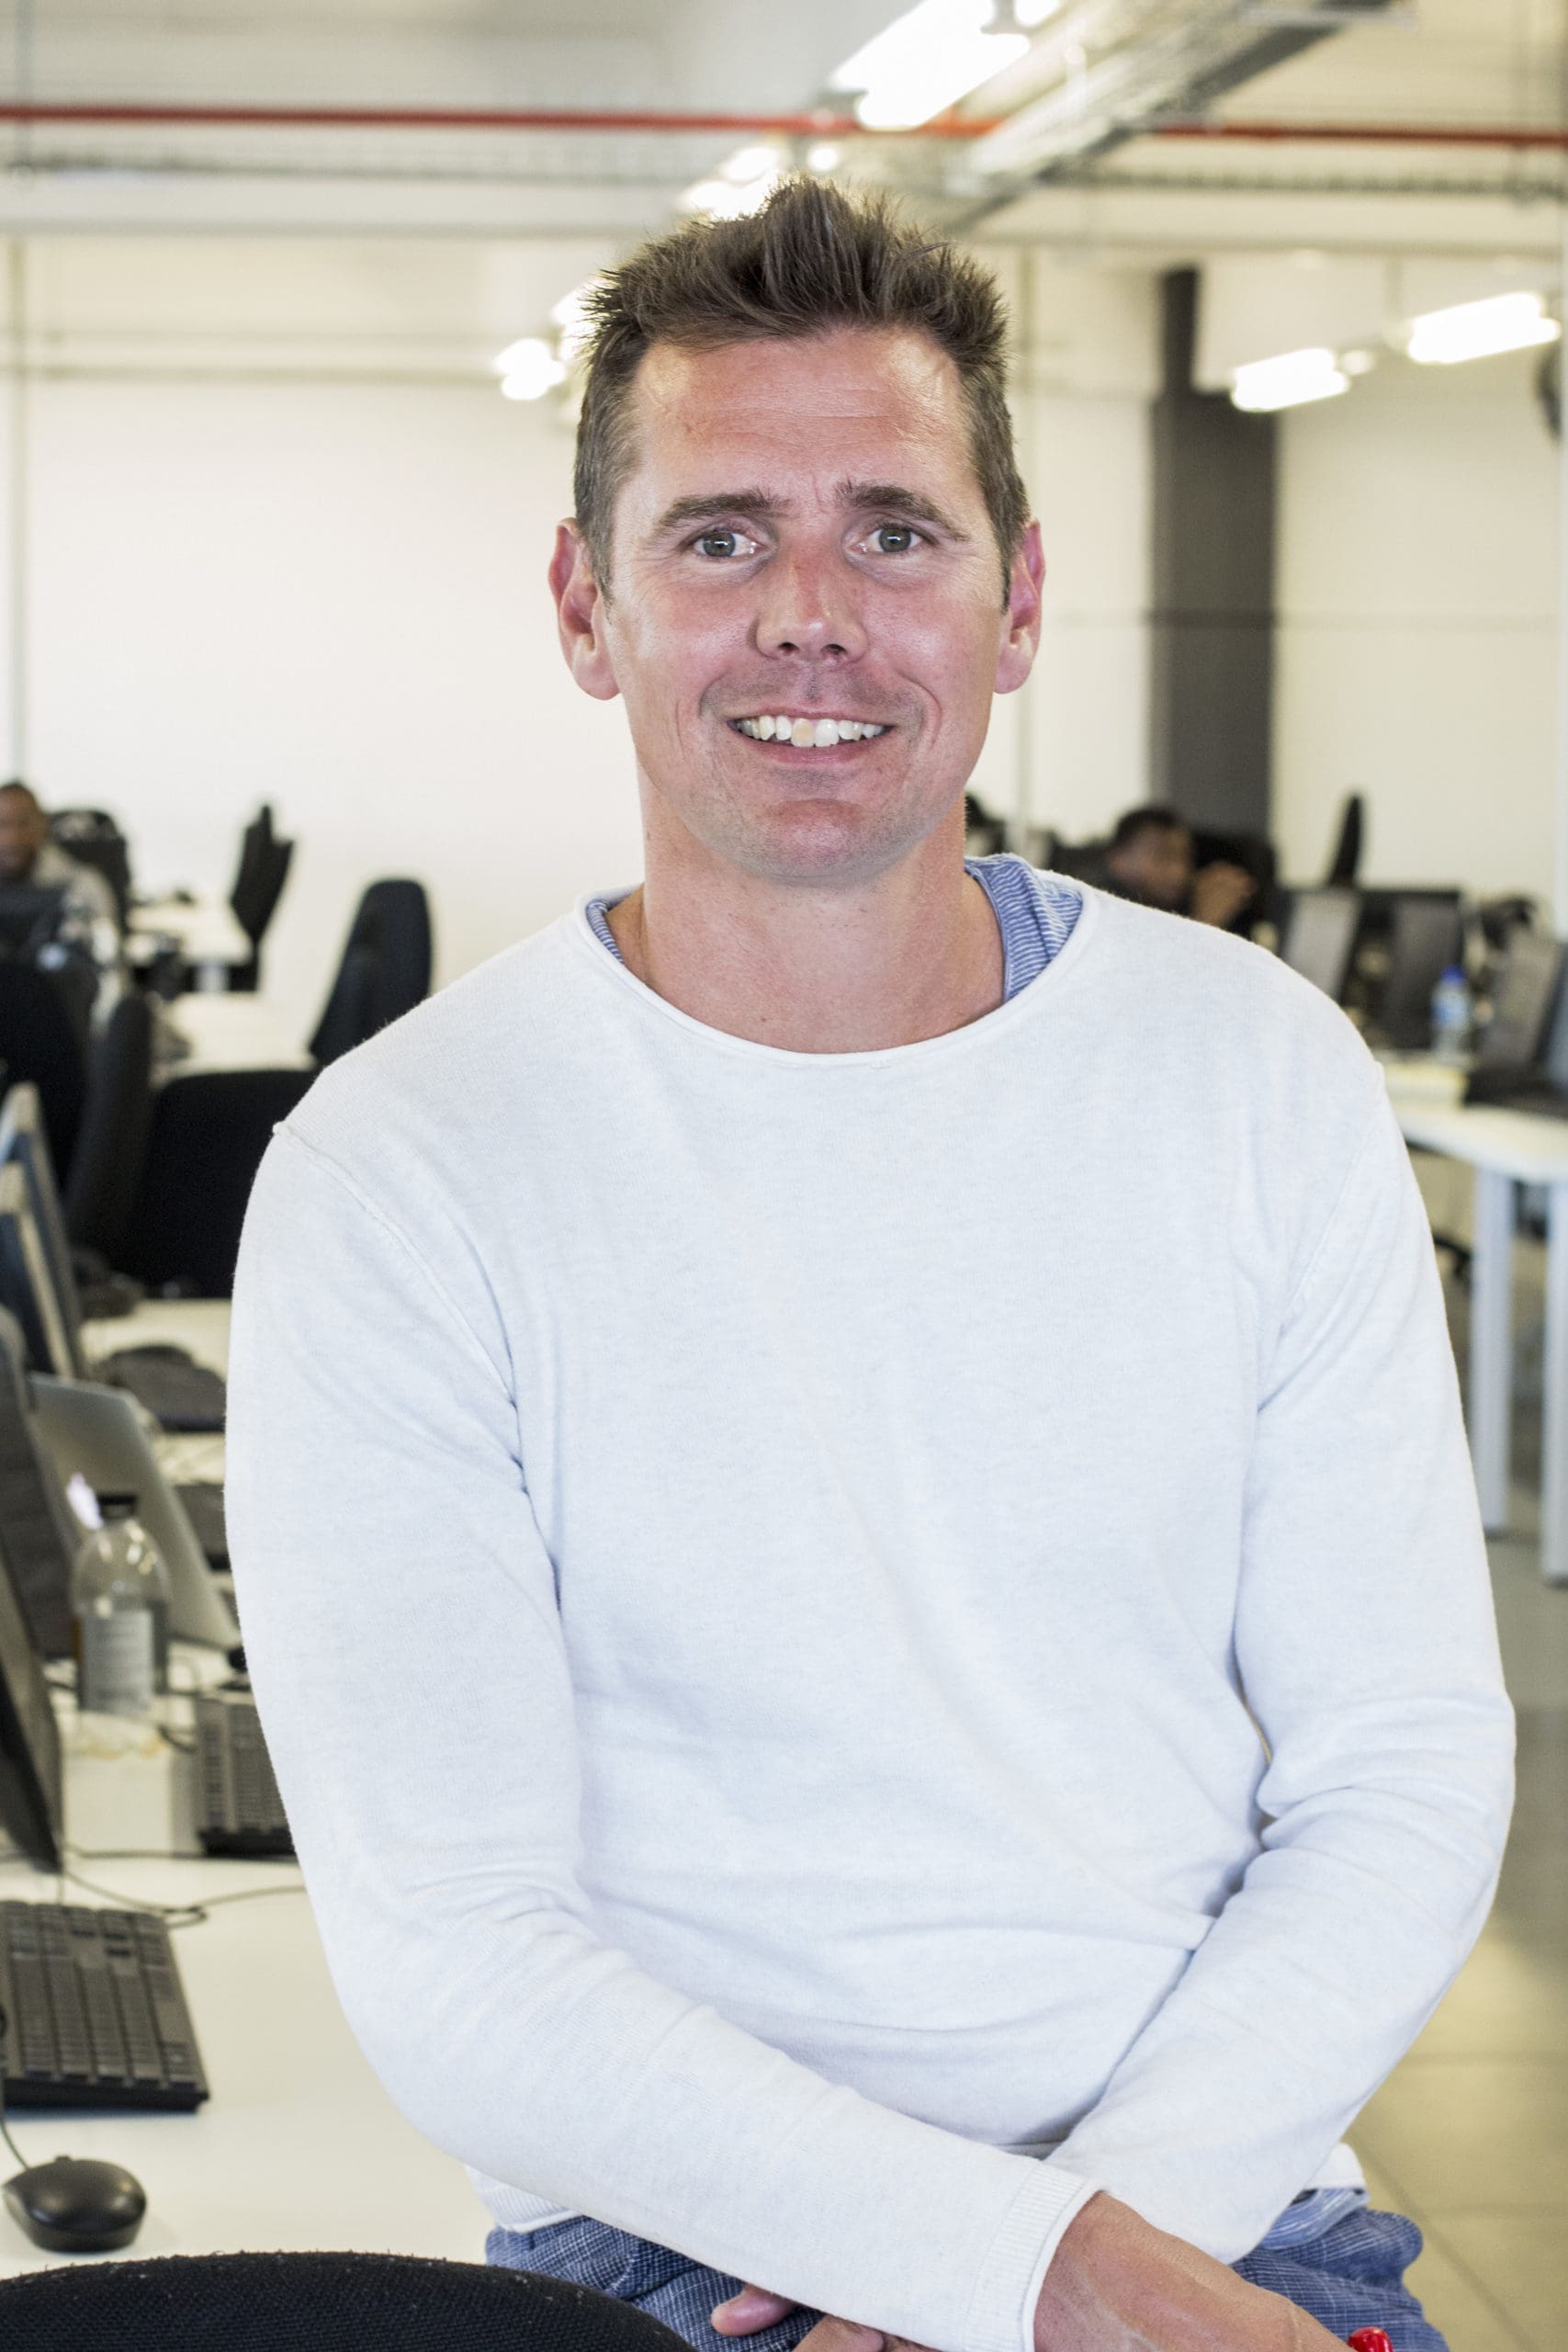 EXPLORE founder and CEO Shaun Dippnall